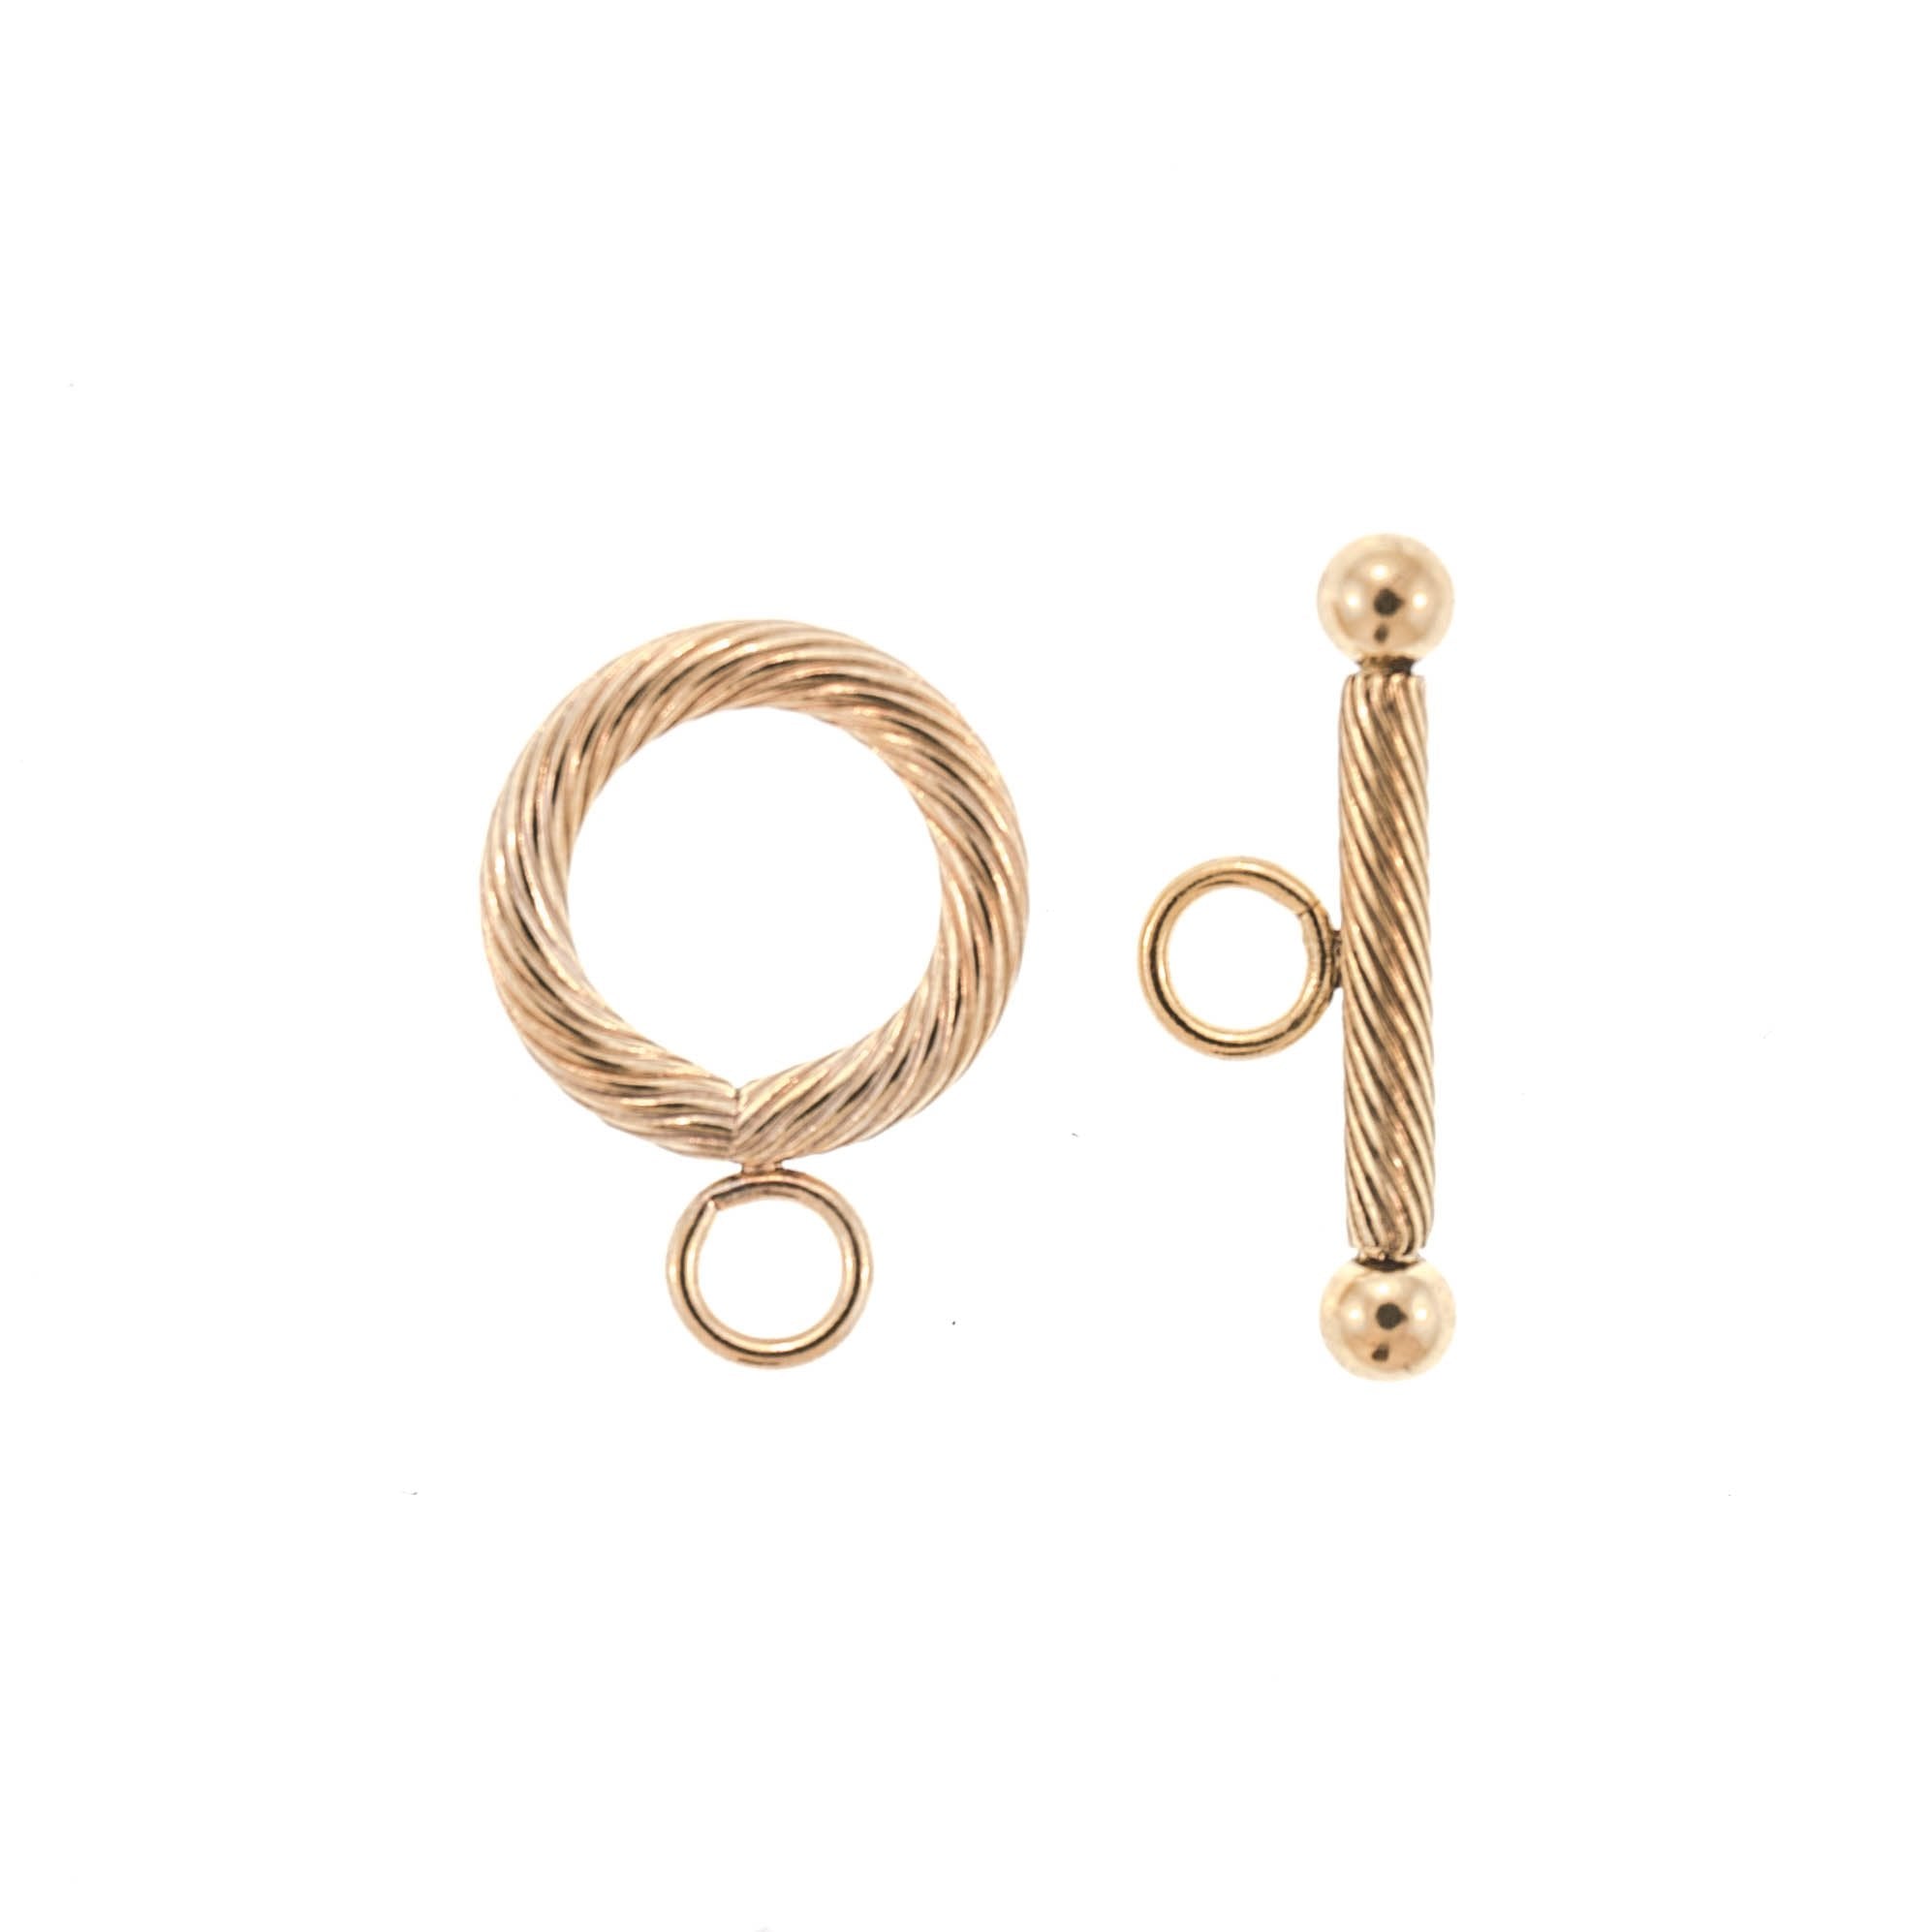 14/20 Yellow Gold-Filled 12MM Toggle Set with Swirl Design